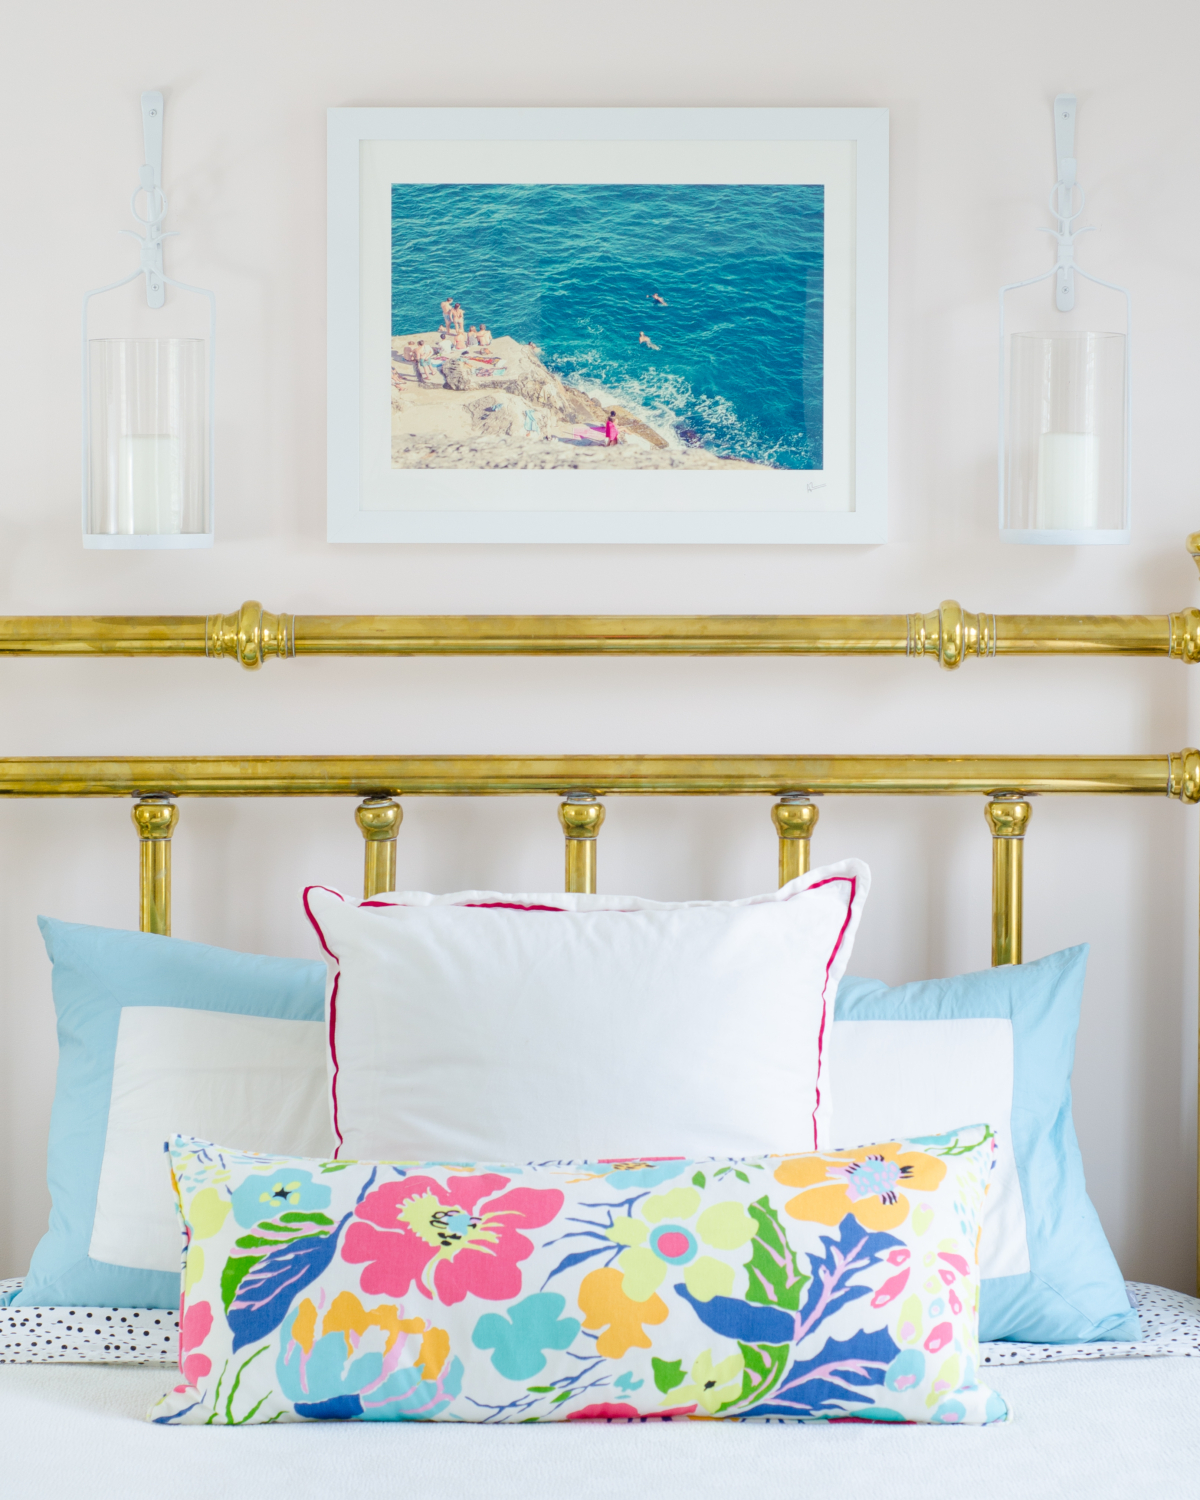 https://www.thechroniclesofhome.com/wp-content/uploads/2016/08/girl-bedroom-turquoise-pink-aqua-navy-3-2-1200x1500.jpg